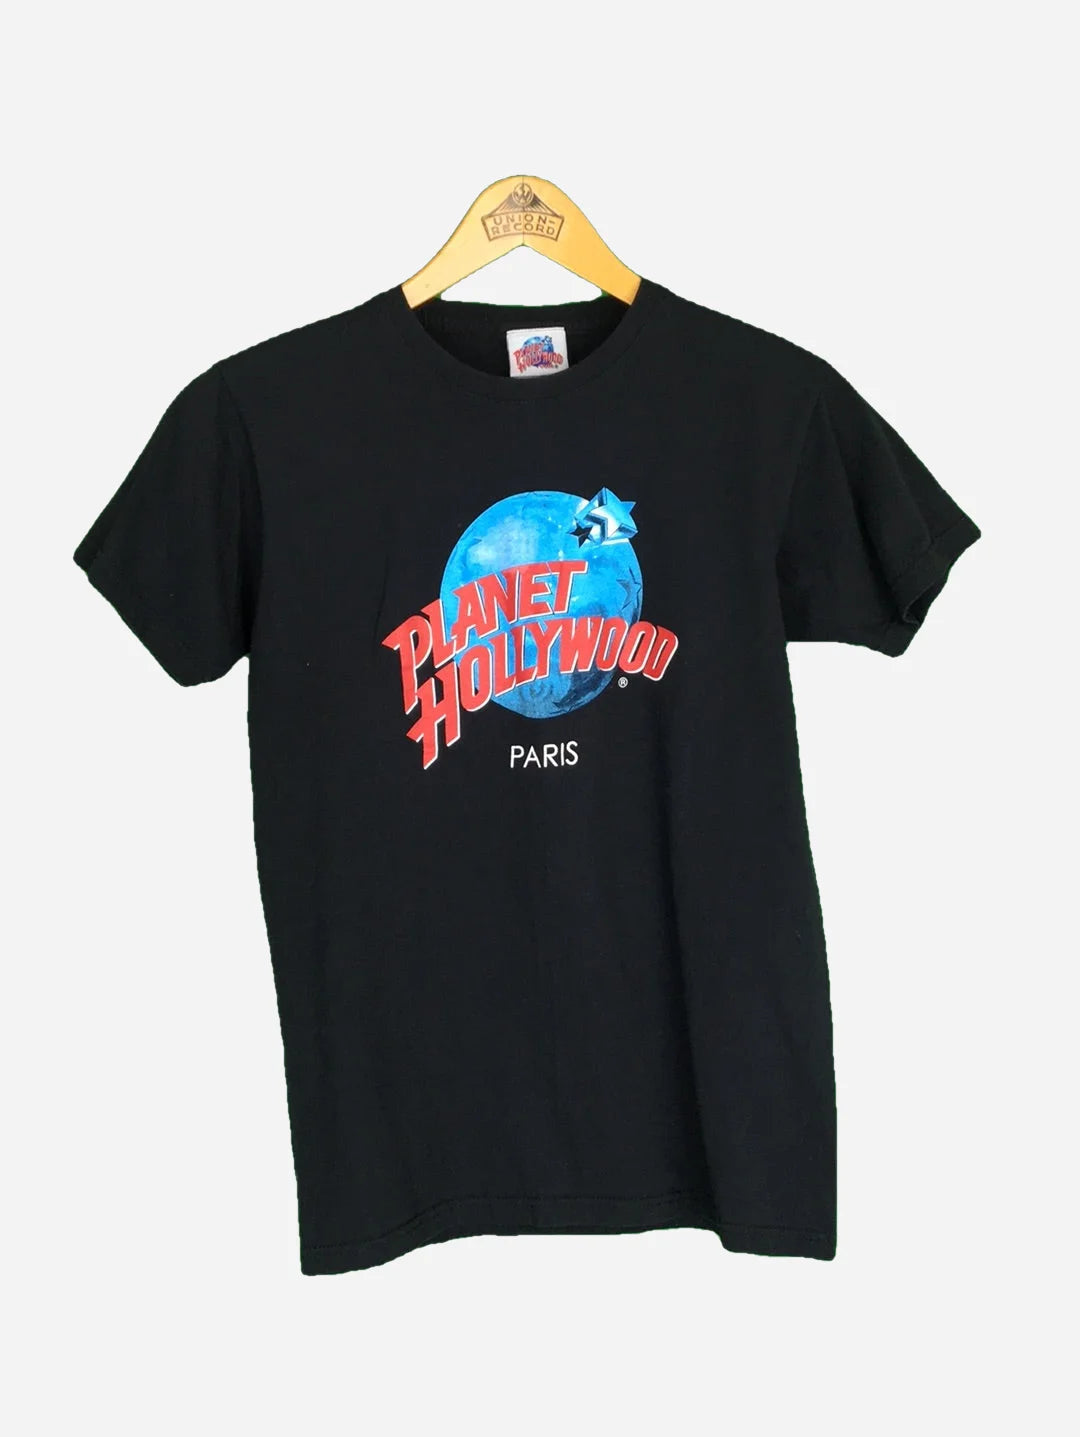 Planet Hollywood T-Shirt (S)